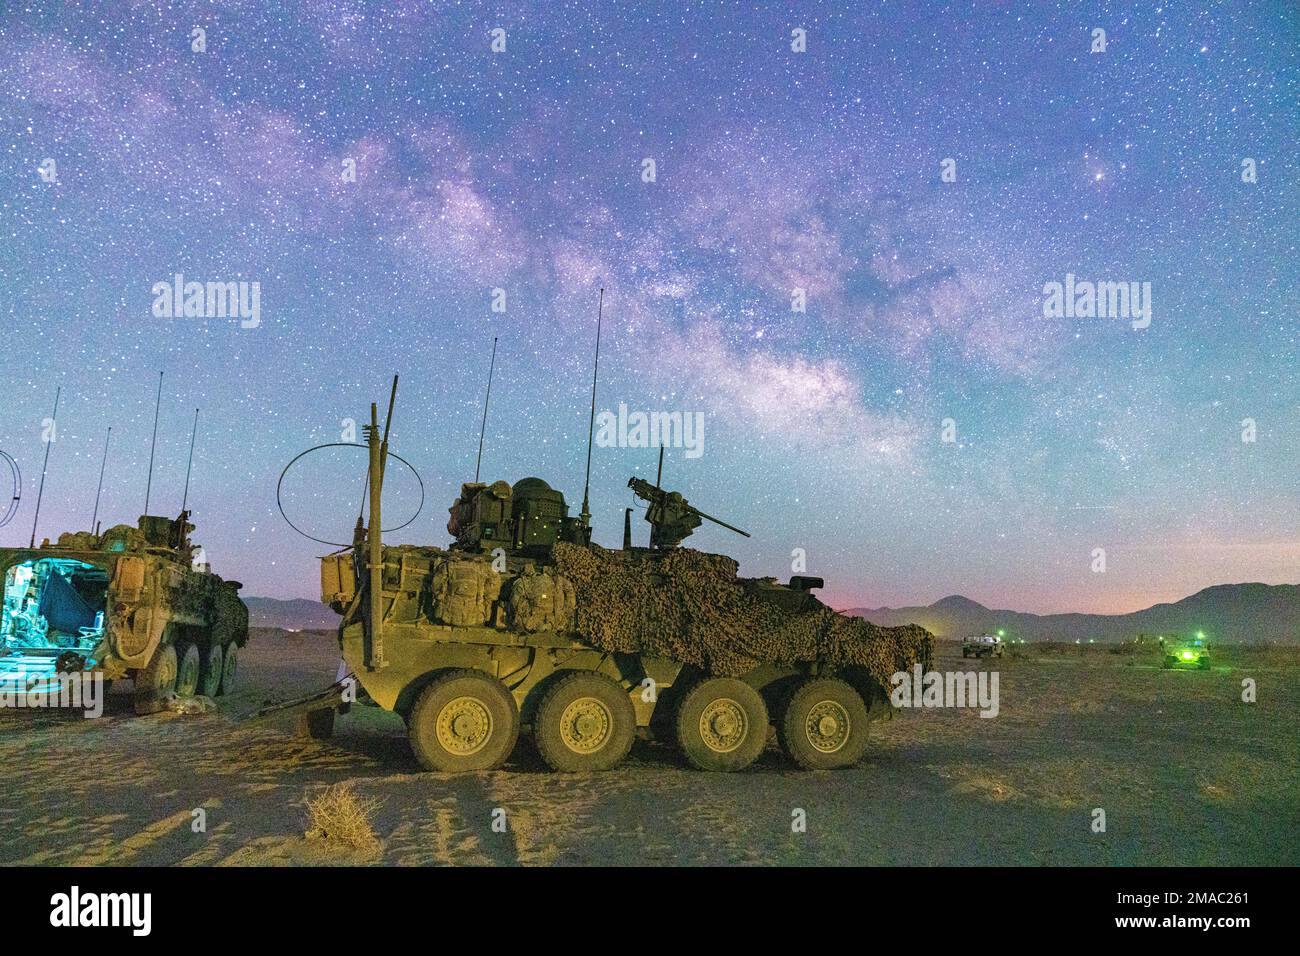 A U.S. Army Stryker assigned to Col. Kevin Bradley, commander of 3d Cavalry Regiment, is parked at a remote location of the National Training Center during a moonless, open sky where the milky way was visible May 24, 2022. Additionally, unmanned aircraft circled the vicinity to monitor for threats and intelligence from the sky. Stock Photo